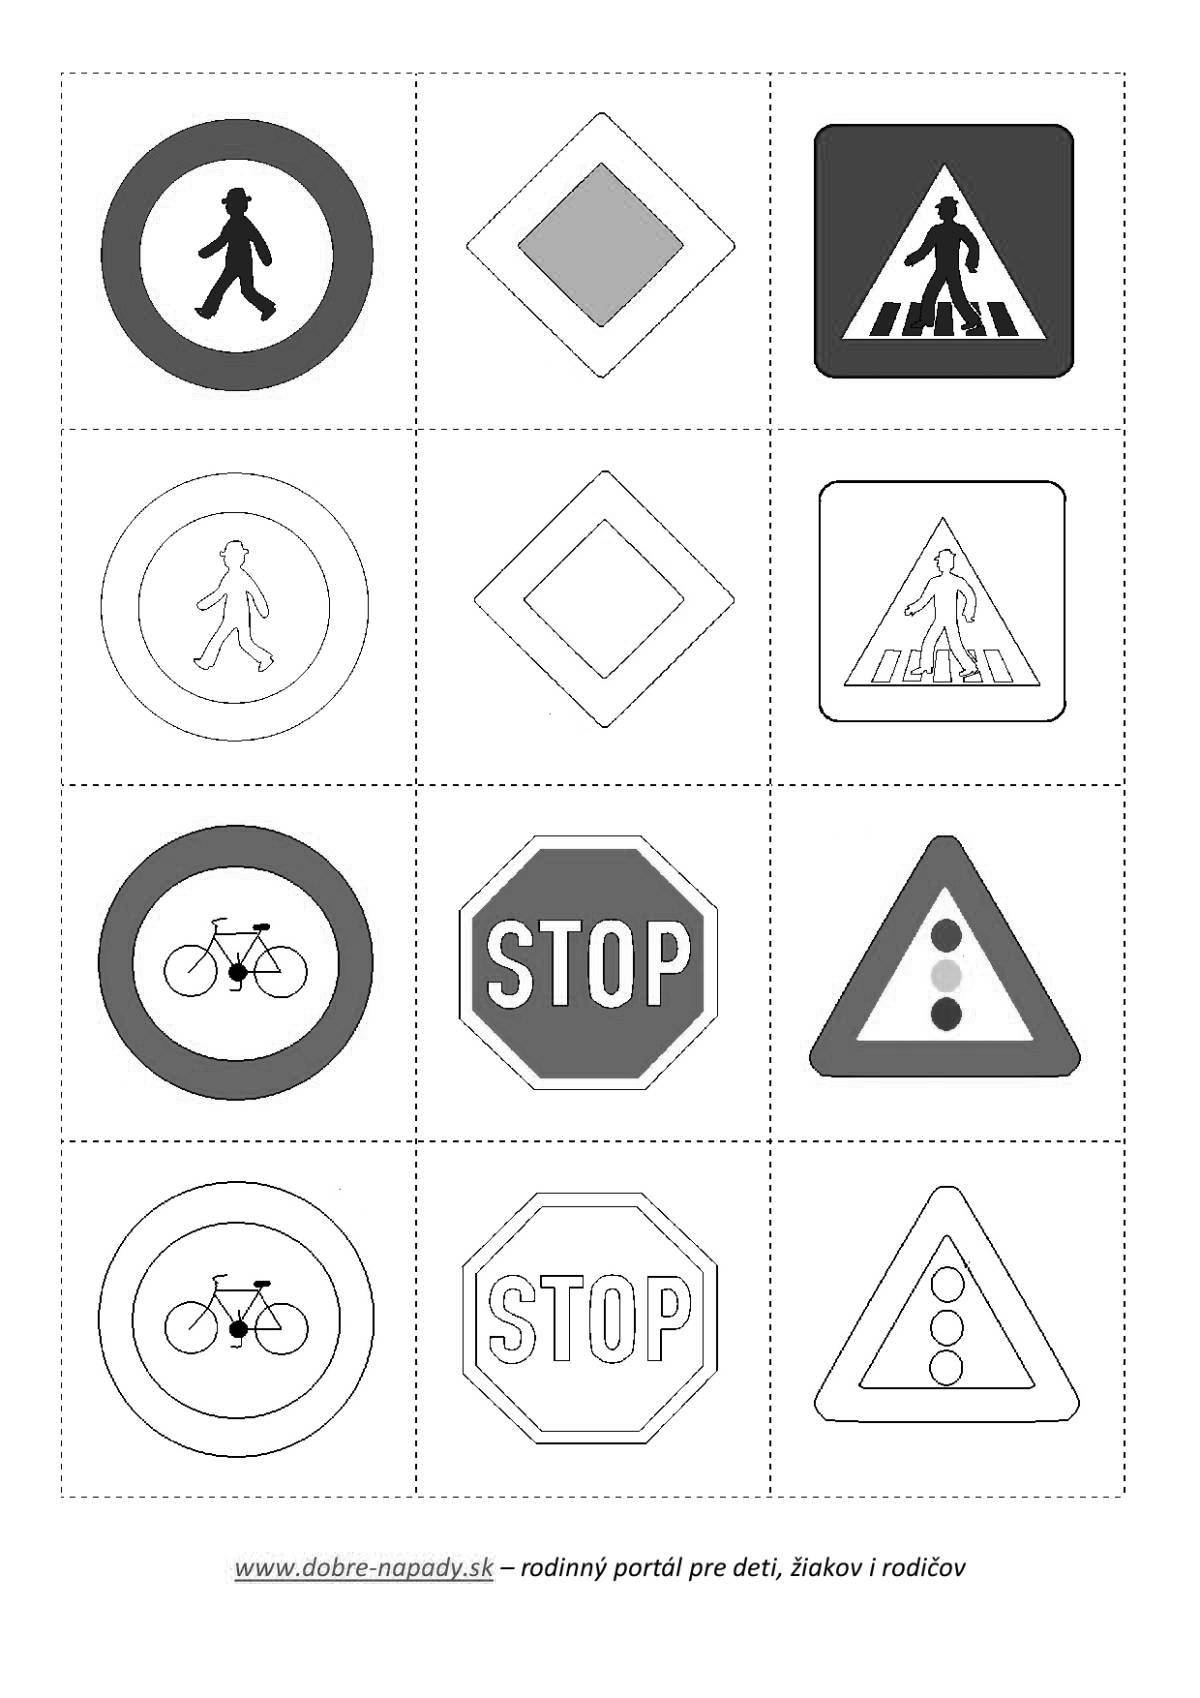 Traffic signs for kids in pictures #8